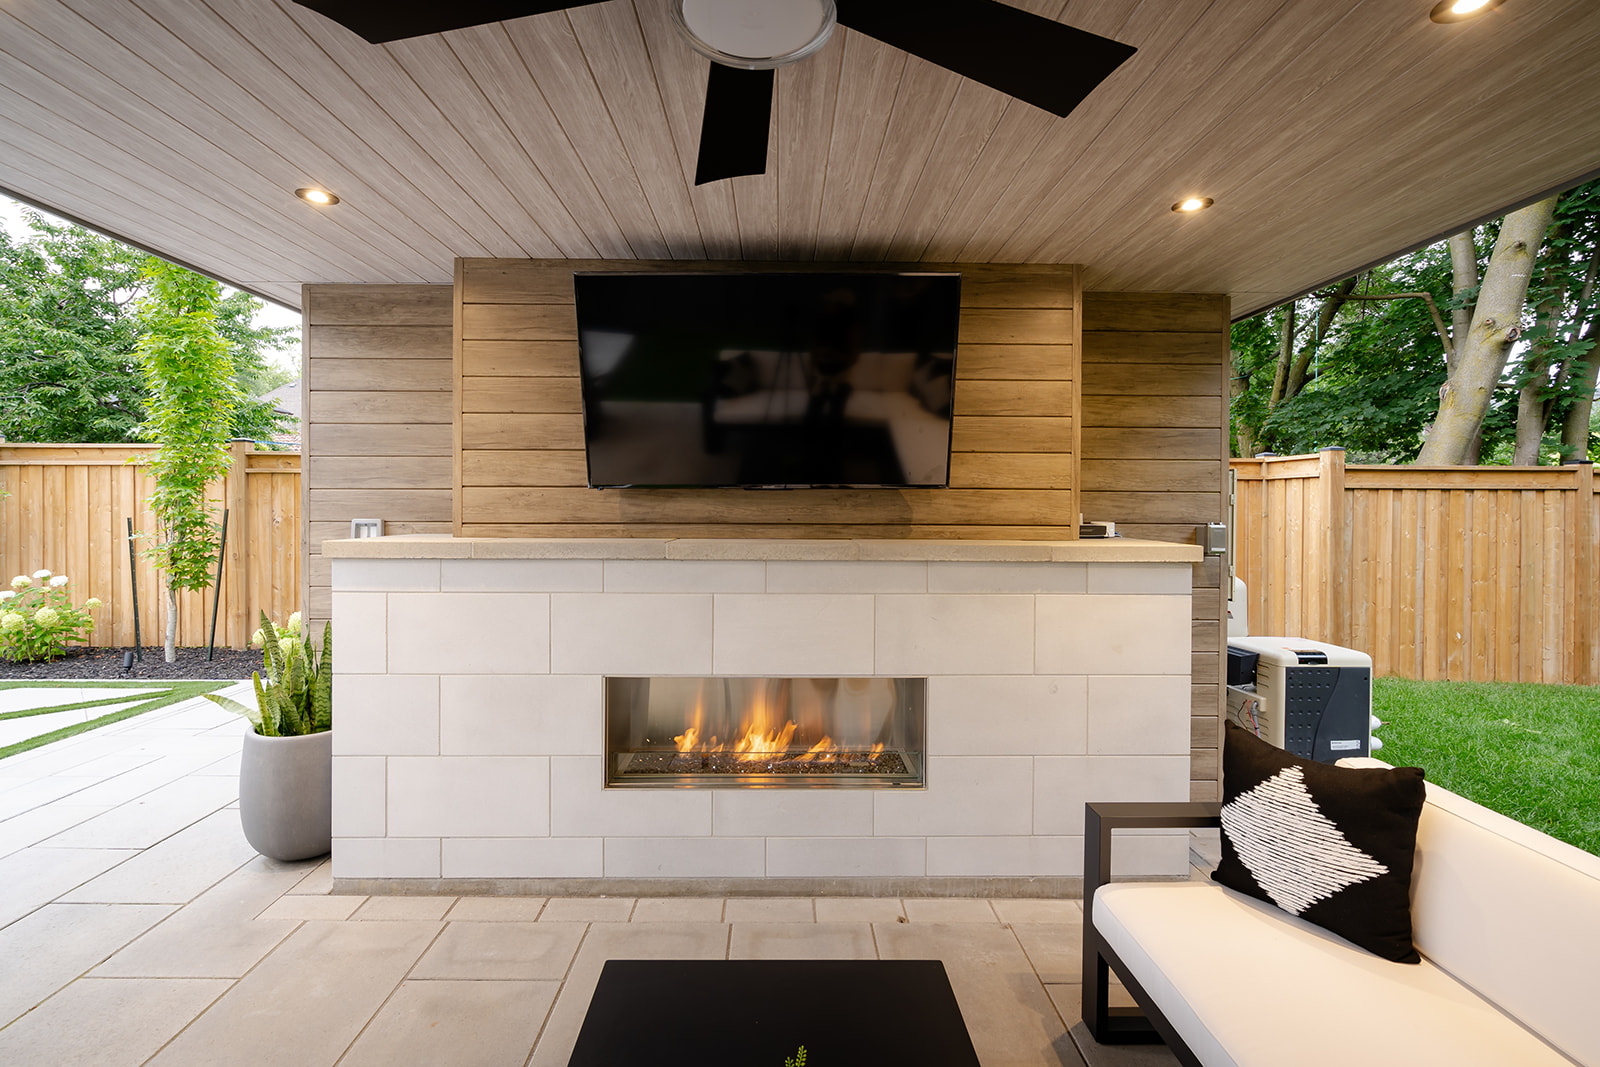 A fireplace in the wall with a tv mounted to the wall with seating.